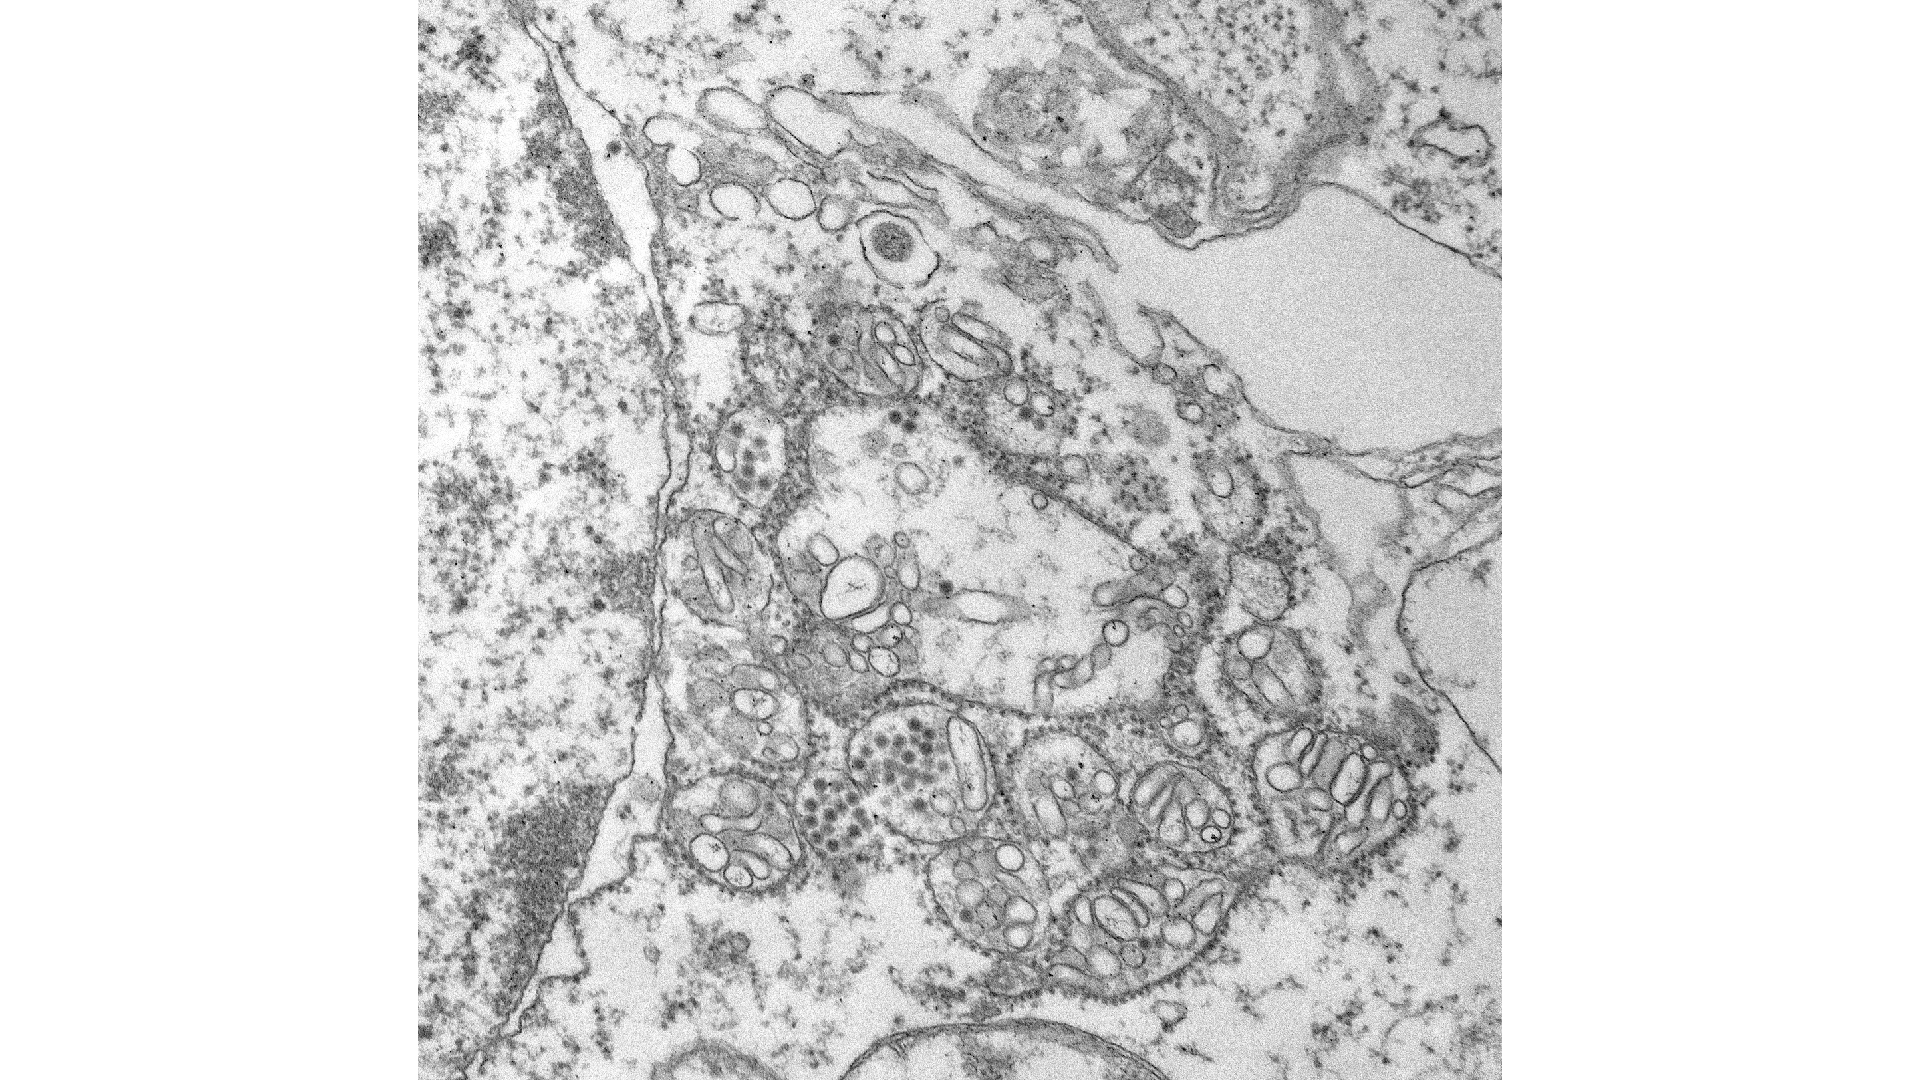 This is an electron microscopic image of Zika virus found in the cytoplasm of a neuron in a fetal brain.